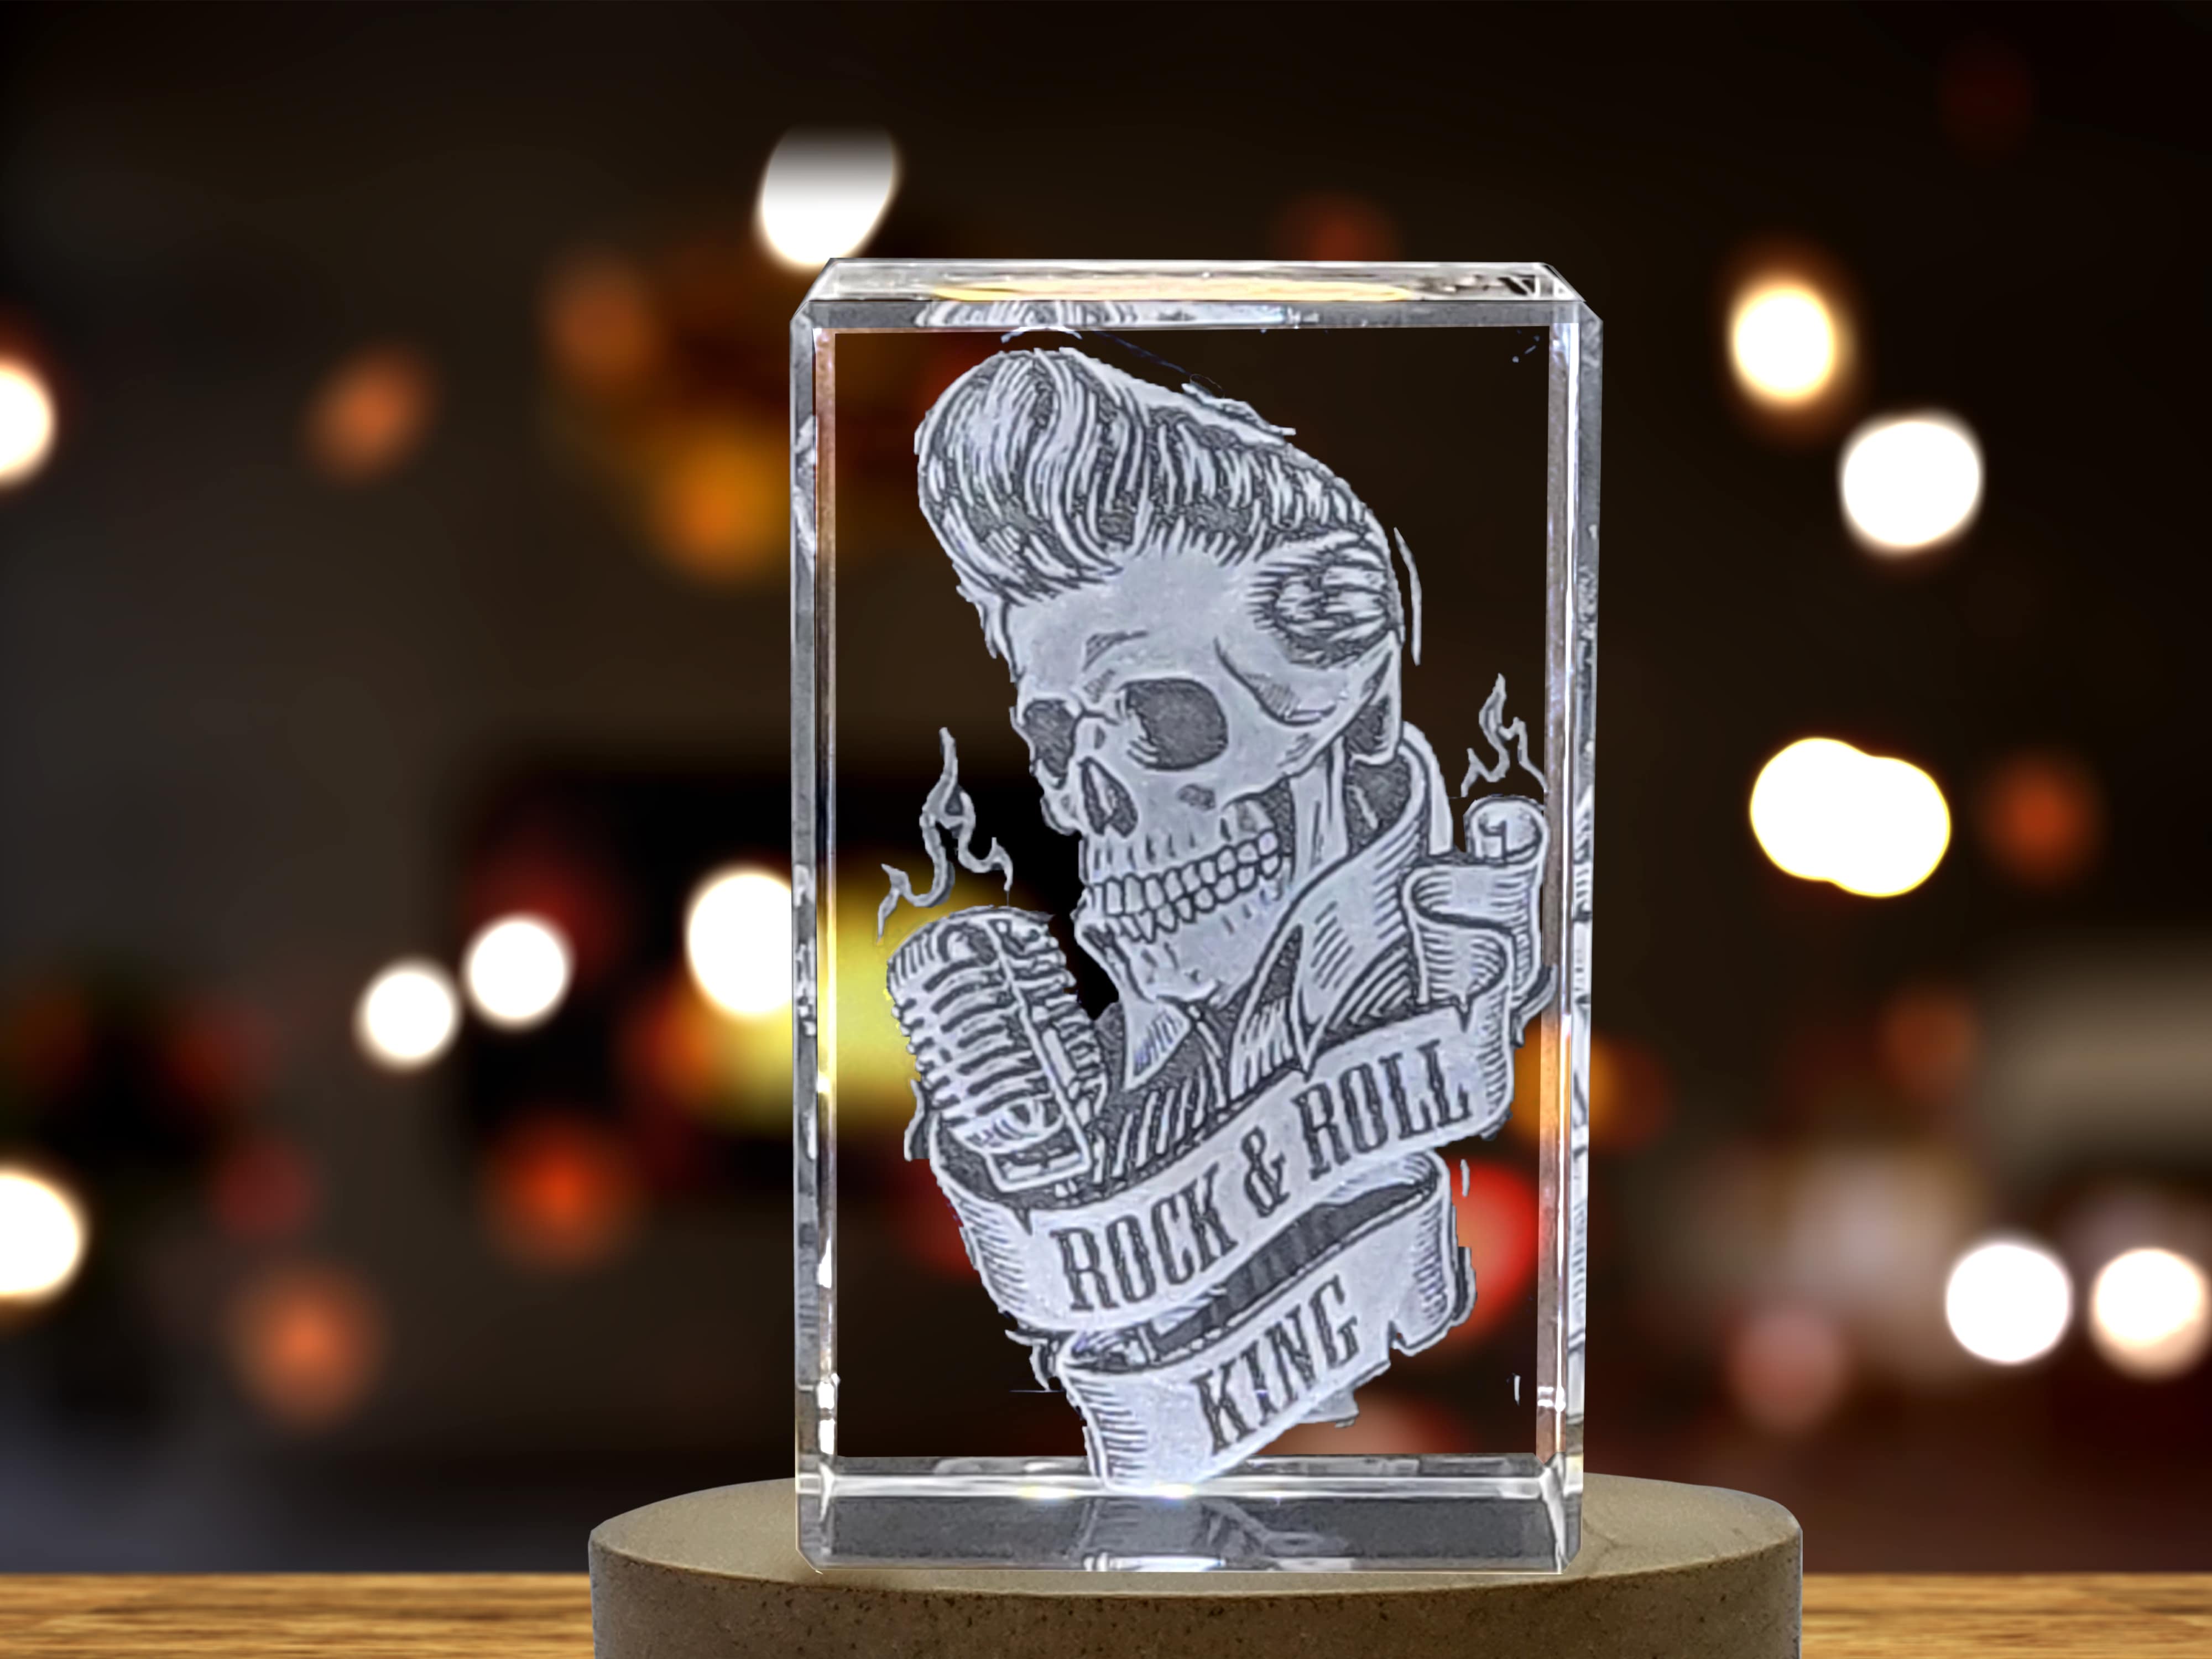 Unique 3D Engraved Crystal with Human Skull Hairstyle, Microphone, and Ribbon Design - Perfect Gift for Music Lovers A&B Crystal Collection